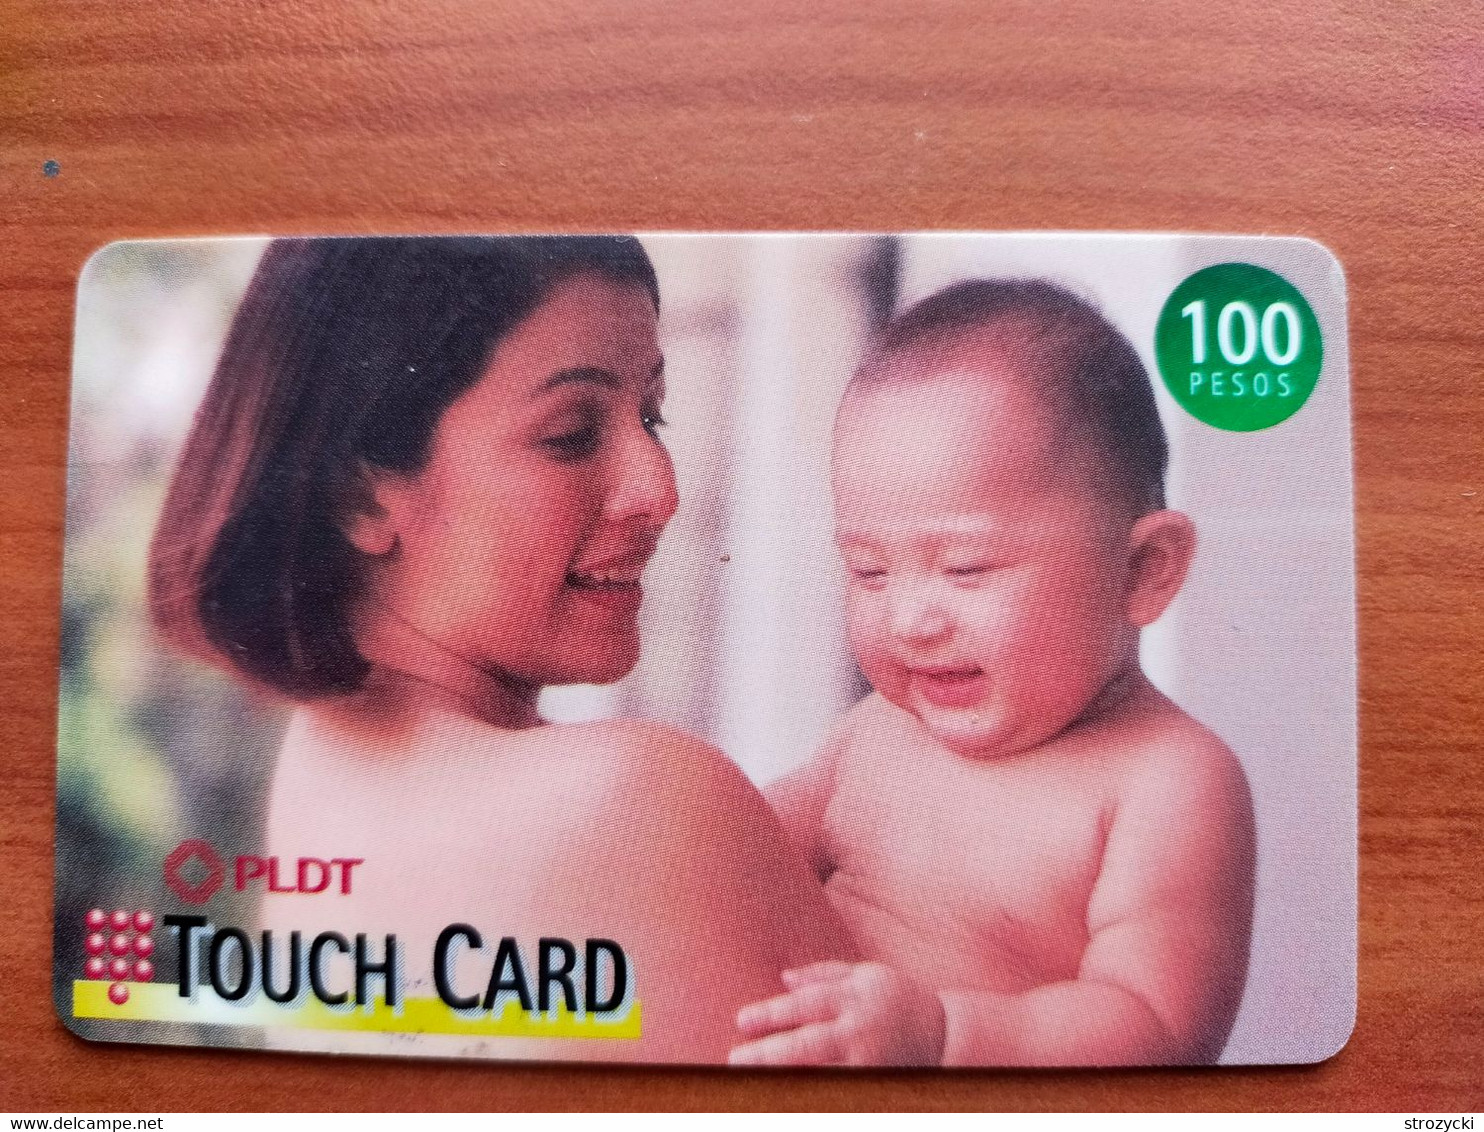 Philippines - PLDT - Touch Card - Woman And Child (02/28/00) - Philippines